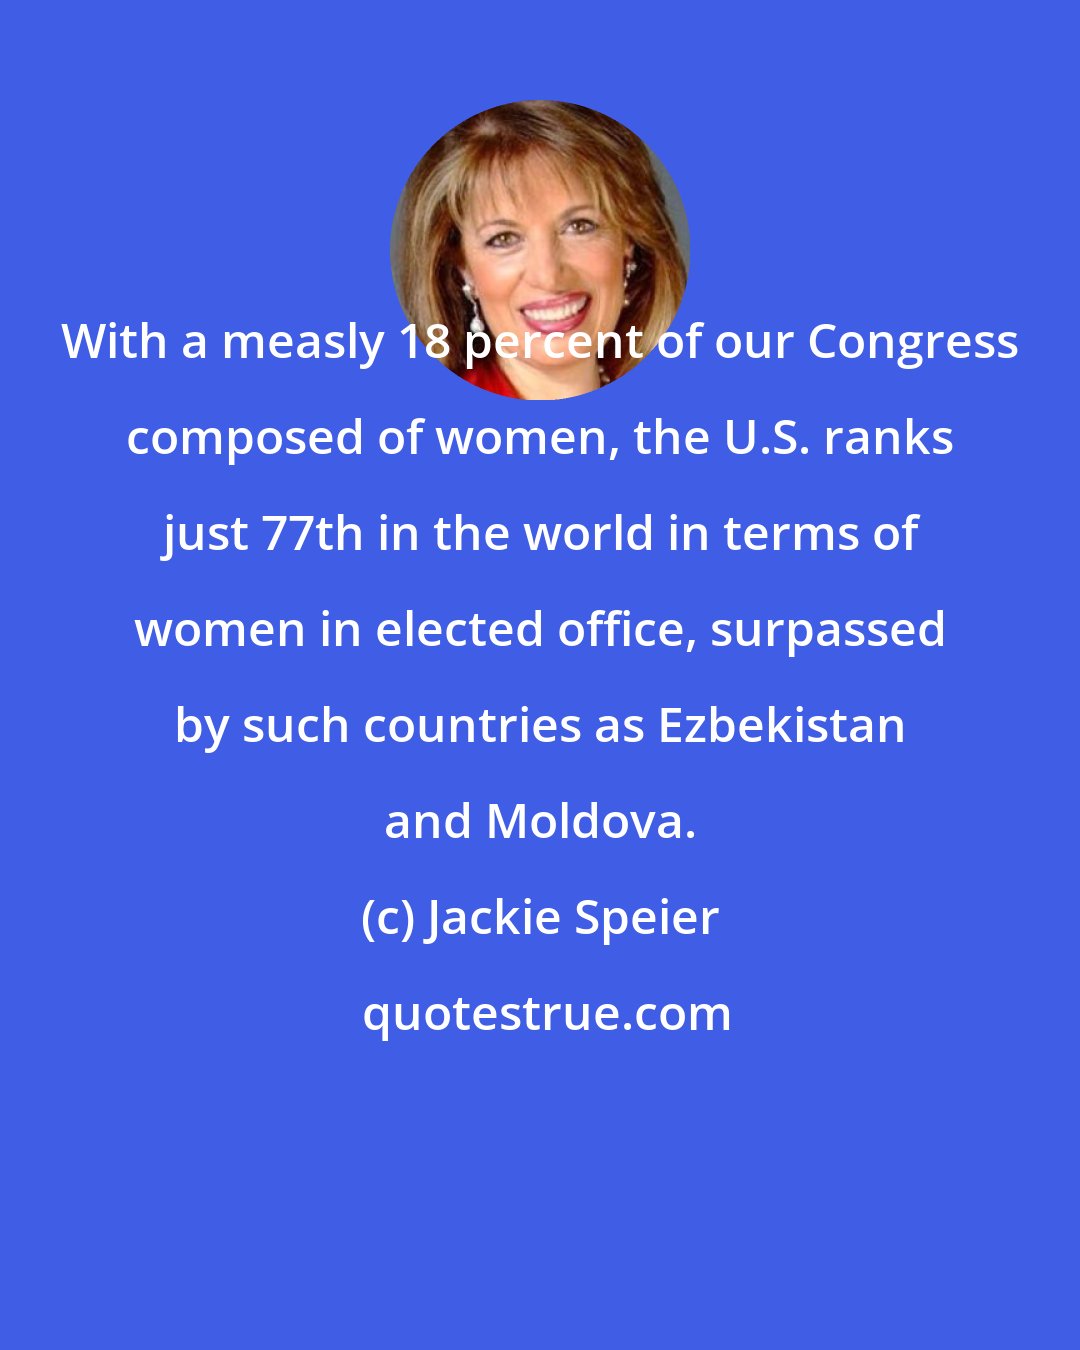 Jackie Speier: With a measly 18 percent of our Congress composed of women, the U.S. ranks just 77th in the world in terms of women in elected office, surpassed by such countries as Ezbekistan and Moldova.